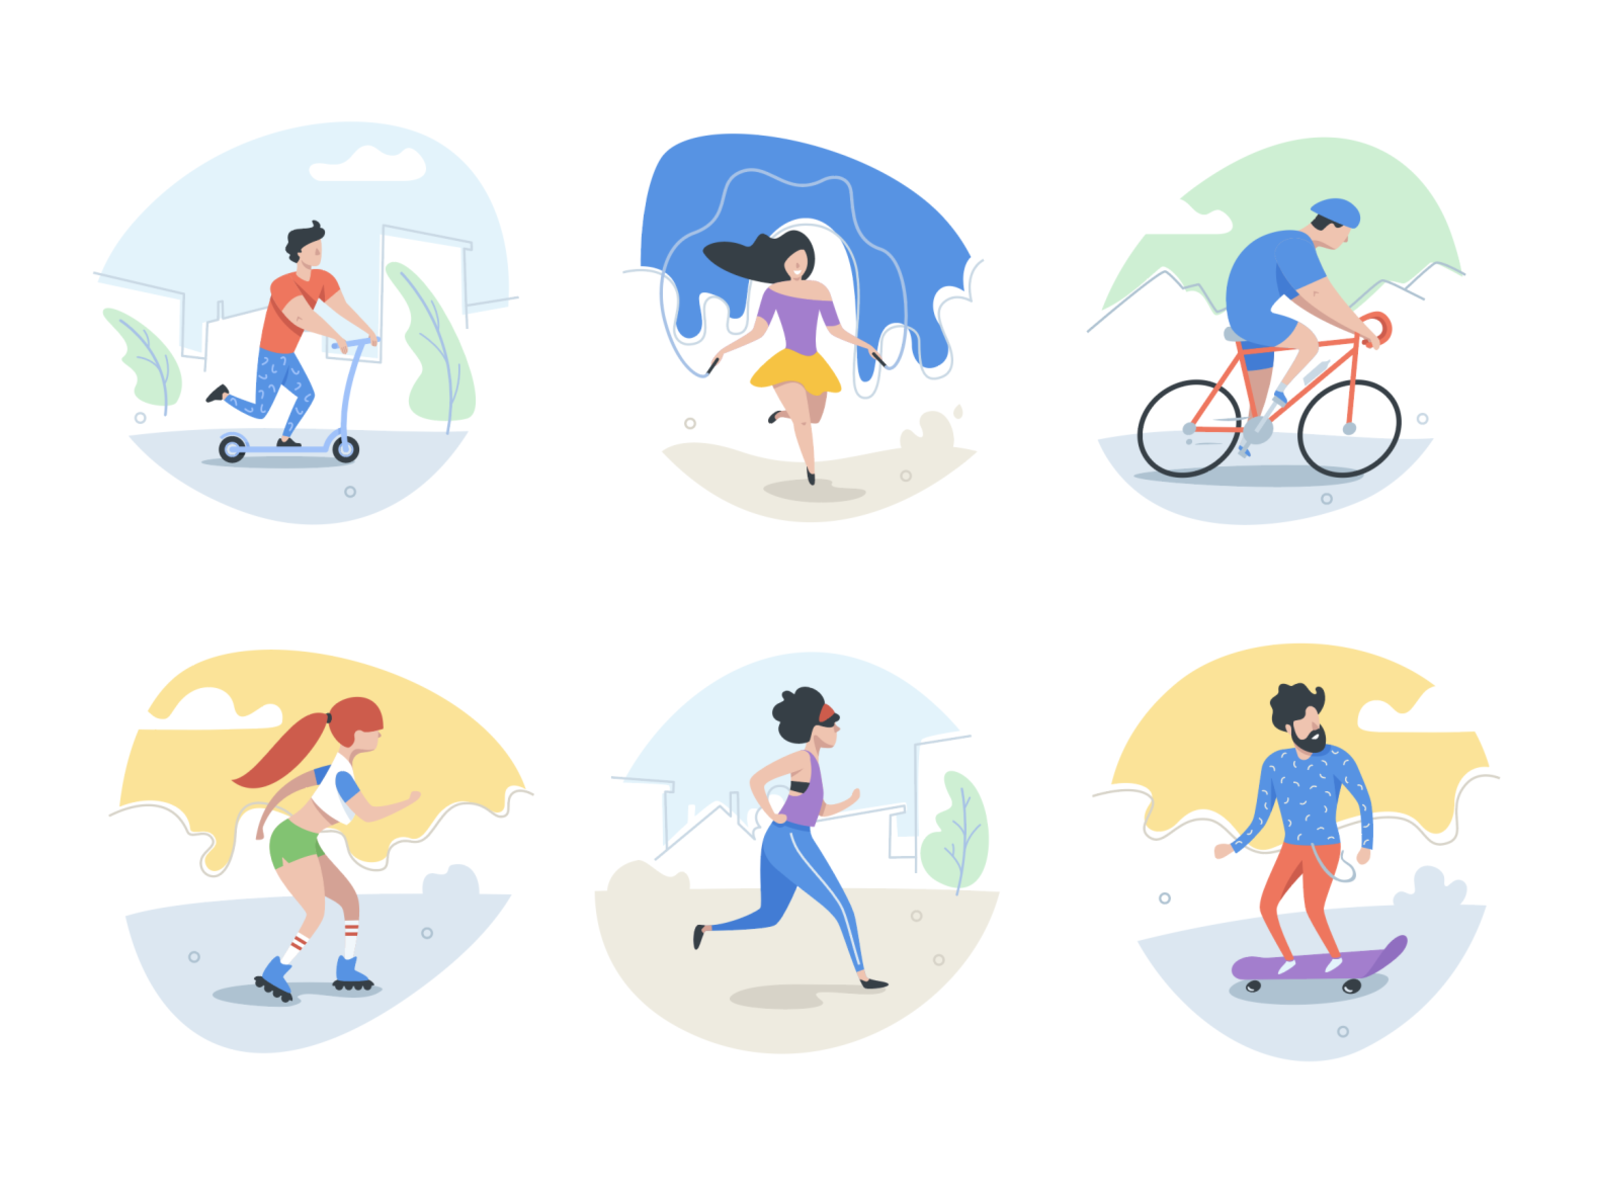 Outdoor activities - Pack 1 bicycle character flat illustration jogging outdoor running scooter skateboard sport sports vector